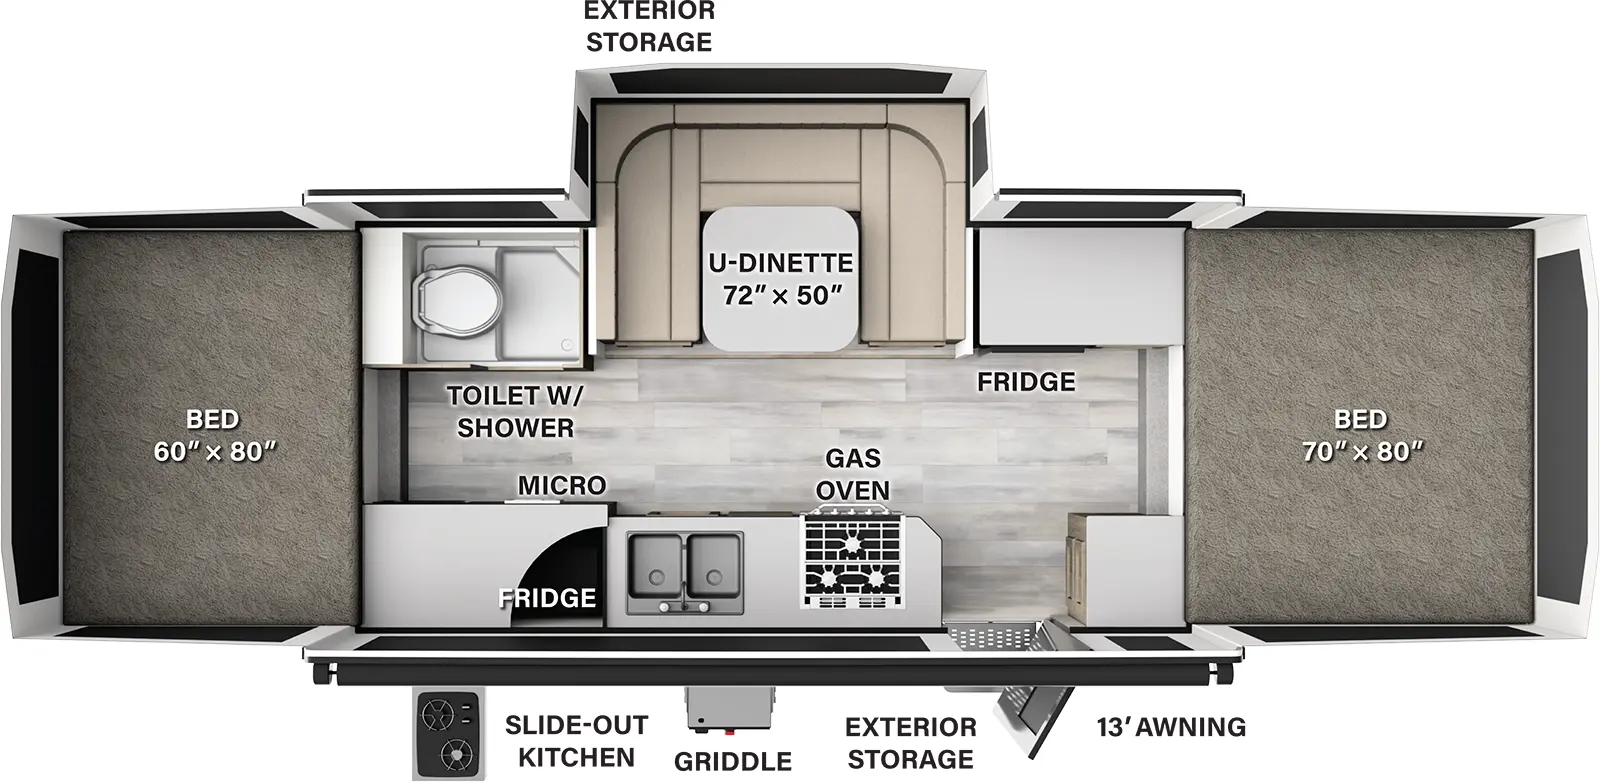 The HW27KS has one slideout and one entry door. Exterior features a 13 foot awning, griddle, slideout kitchen with refrigerator and exterior storage on both sides. Interior layout front to back: front tent bed; off-door side cabinet with refrigerator, u-dinette slideout, and toilet w/shower; door side cabinet, entry, gas oven, sink, and cabinet with microwave; tent bed in the rear. 